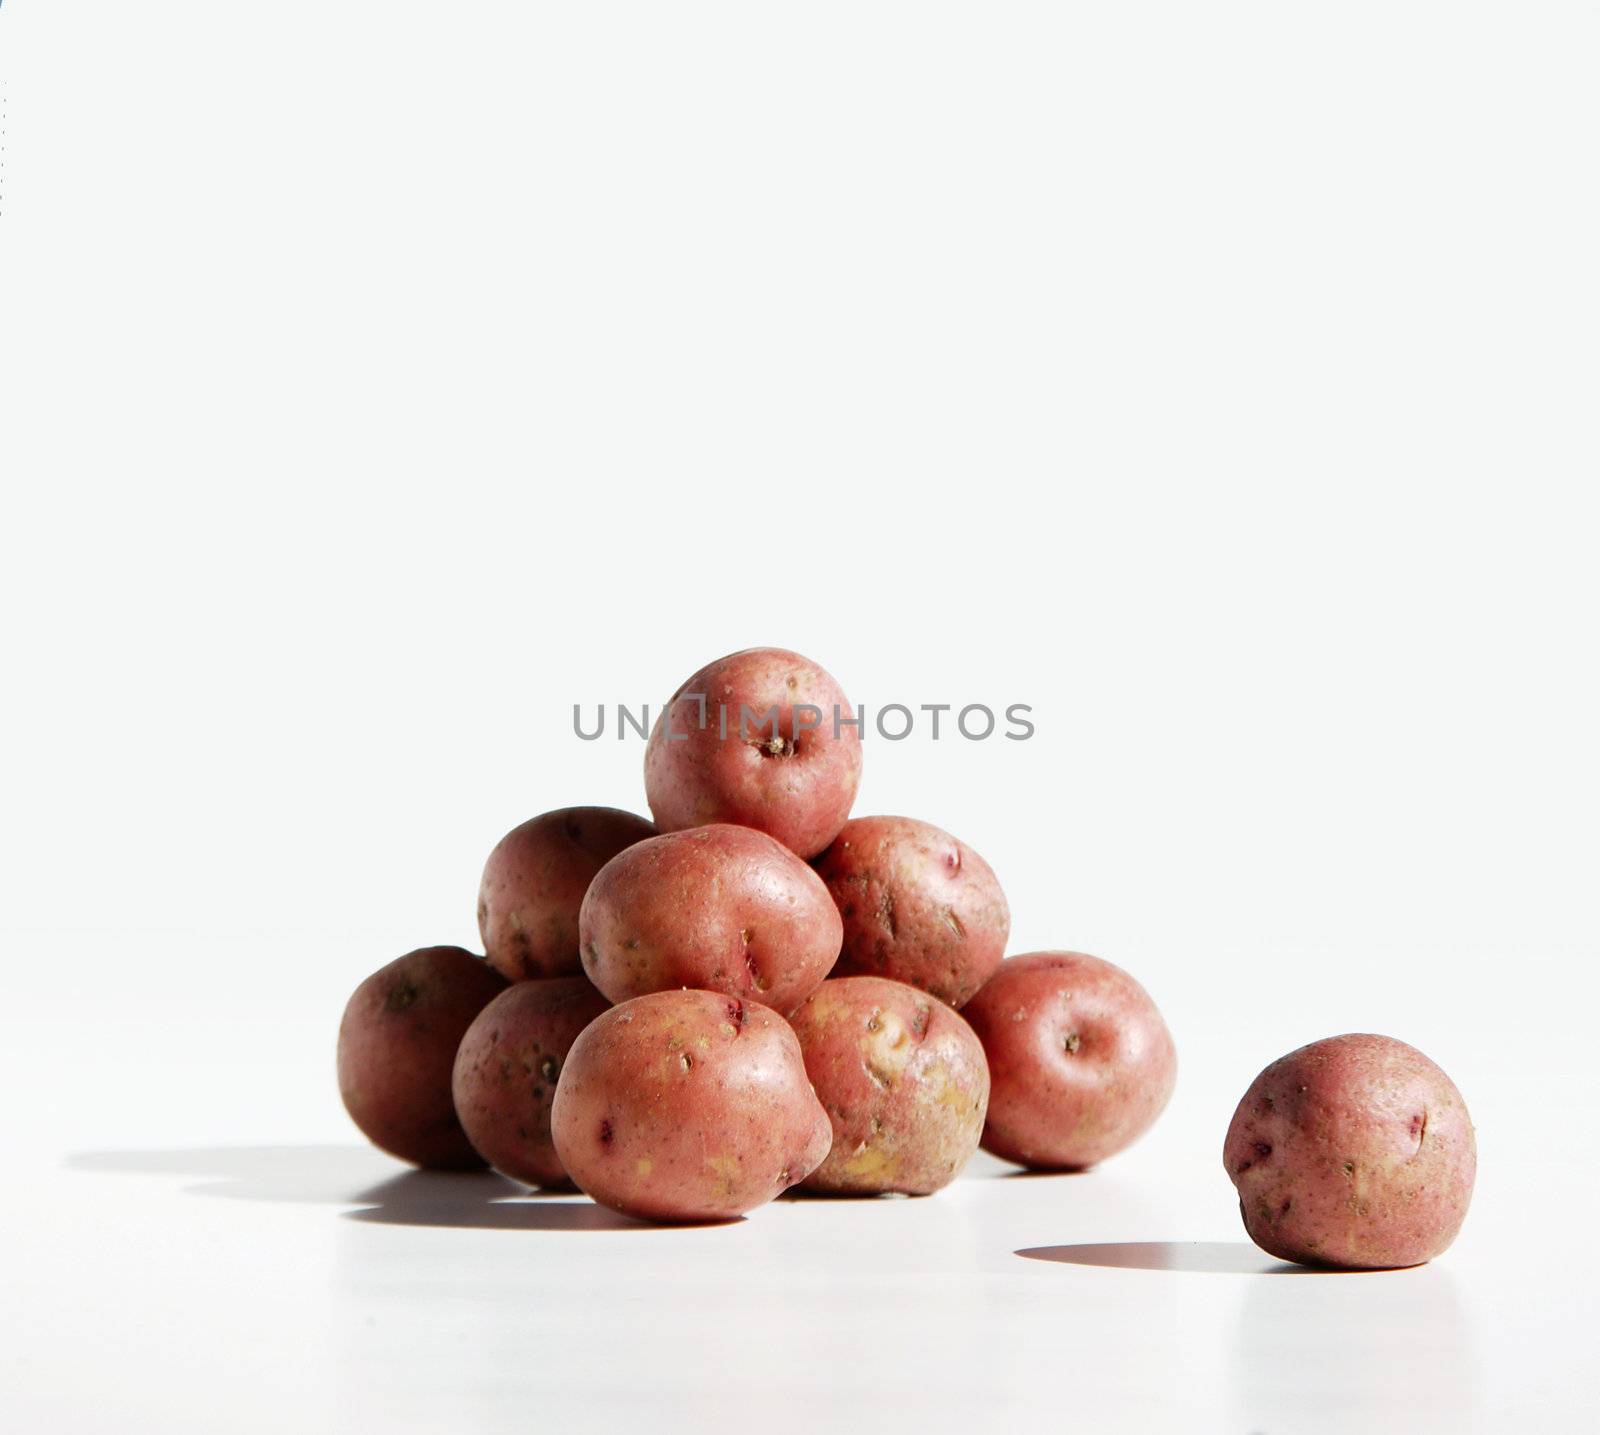 Pile of organic red potatos against a pure white background.